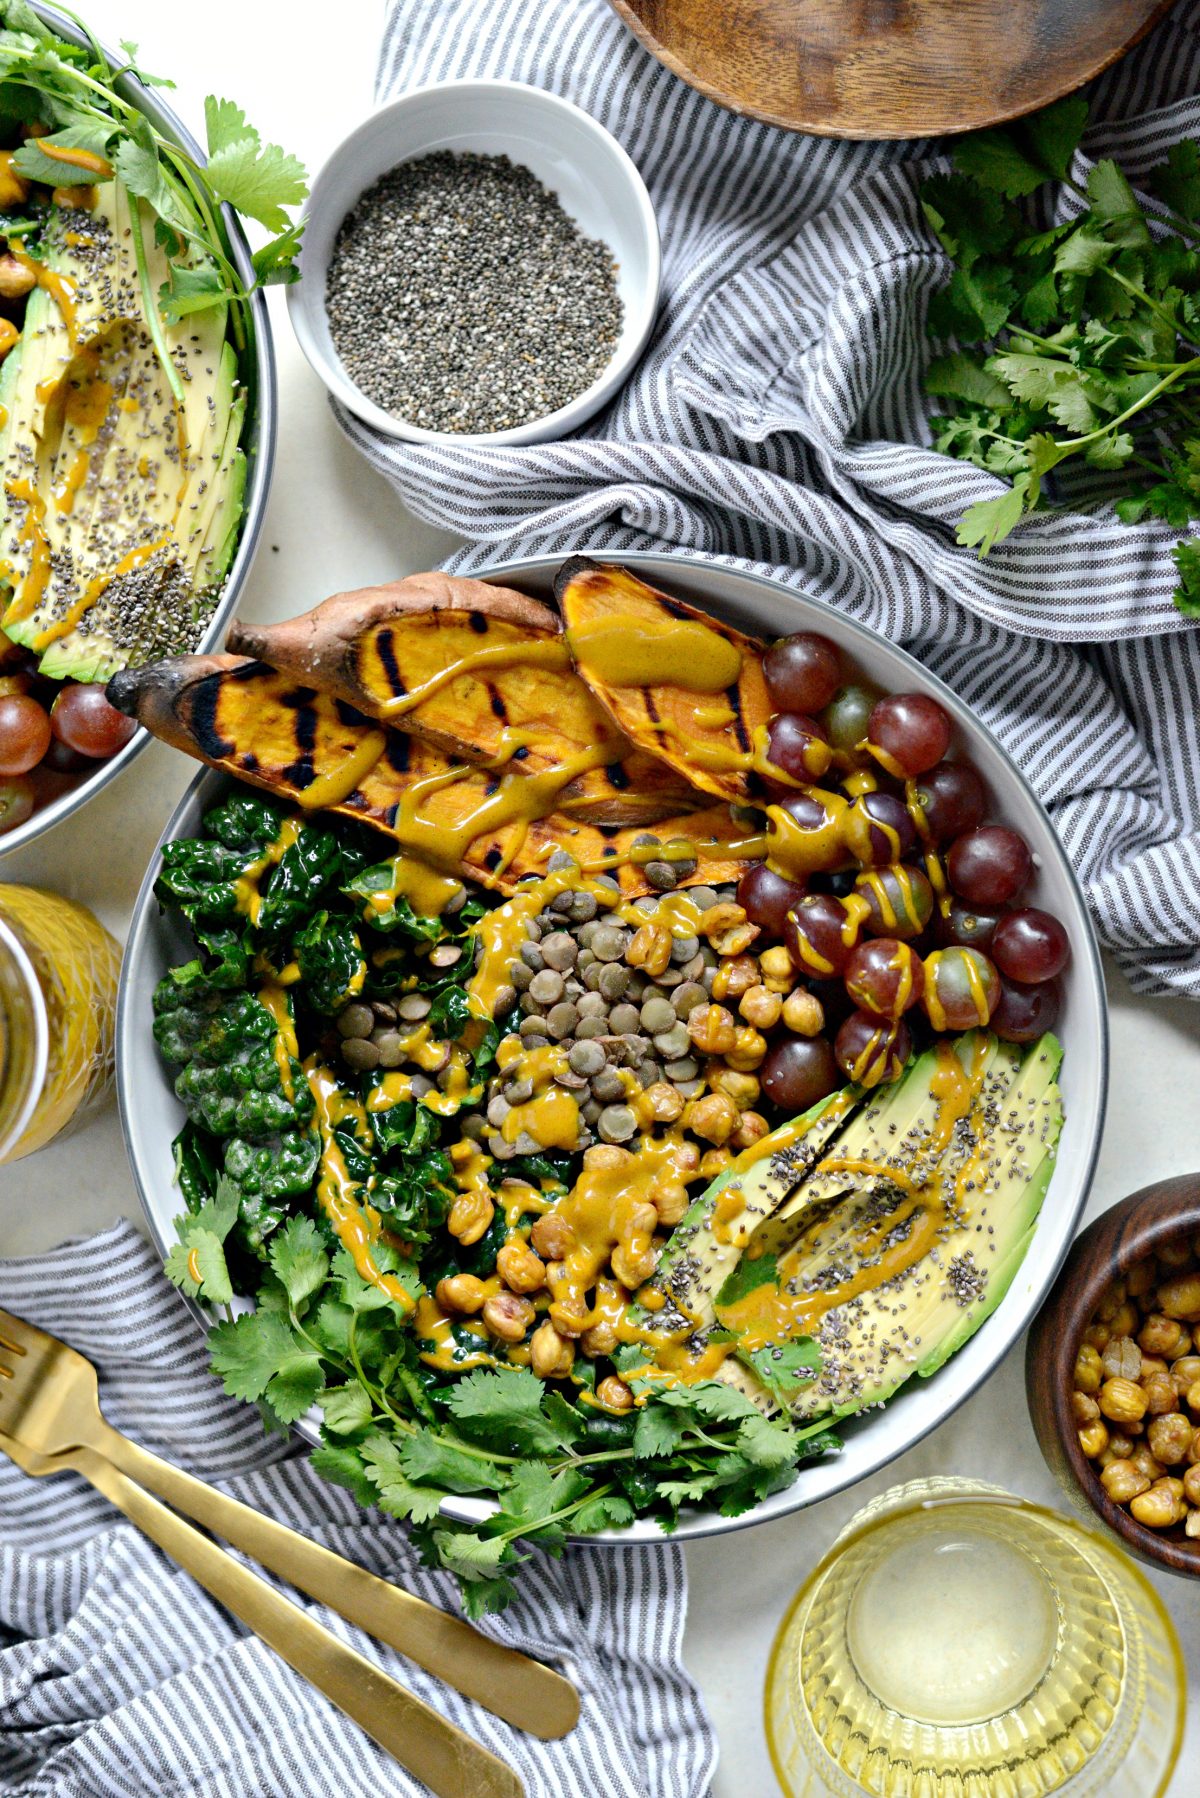 Grilled Sweet Potato, Lentil and Kale Buddha Bowl with Golden Almond Butter Dressing l SimplyScratch.com (23)